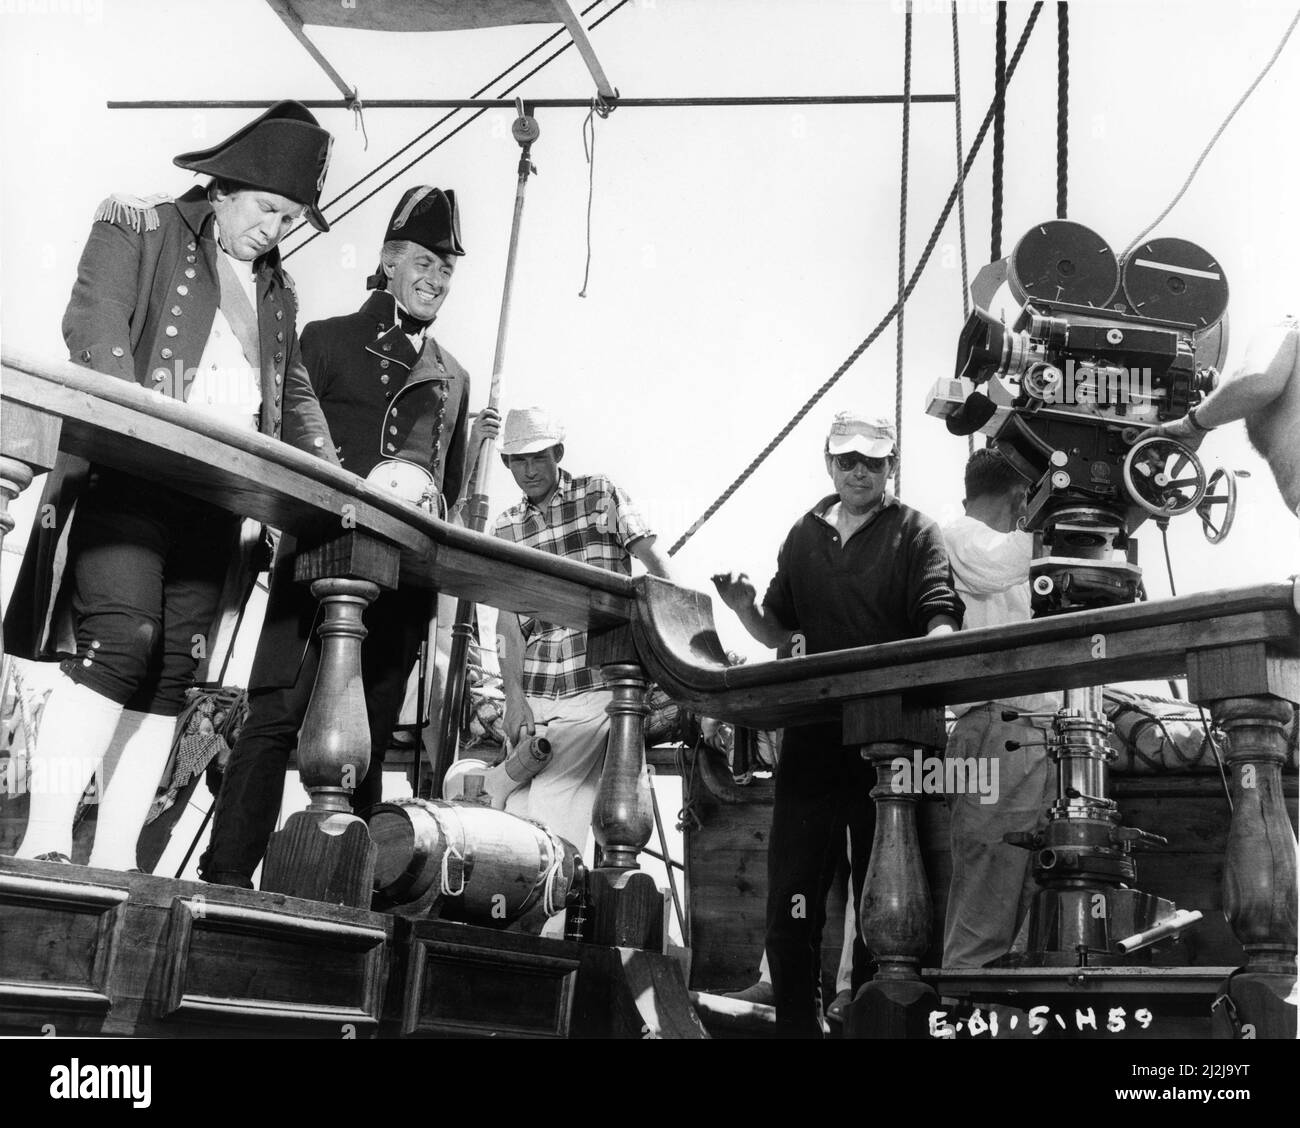 Star and Director PETER USTINOV and PAUL ROGERS on set candid on ship during filming of BILLY BUDD 1962 director PETER USTINOV novel Hermann Melville cinematographer Robert Krasker Anglo Allied / Allied Artists Pictures Stock Photo